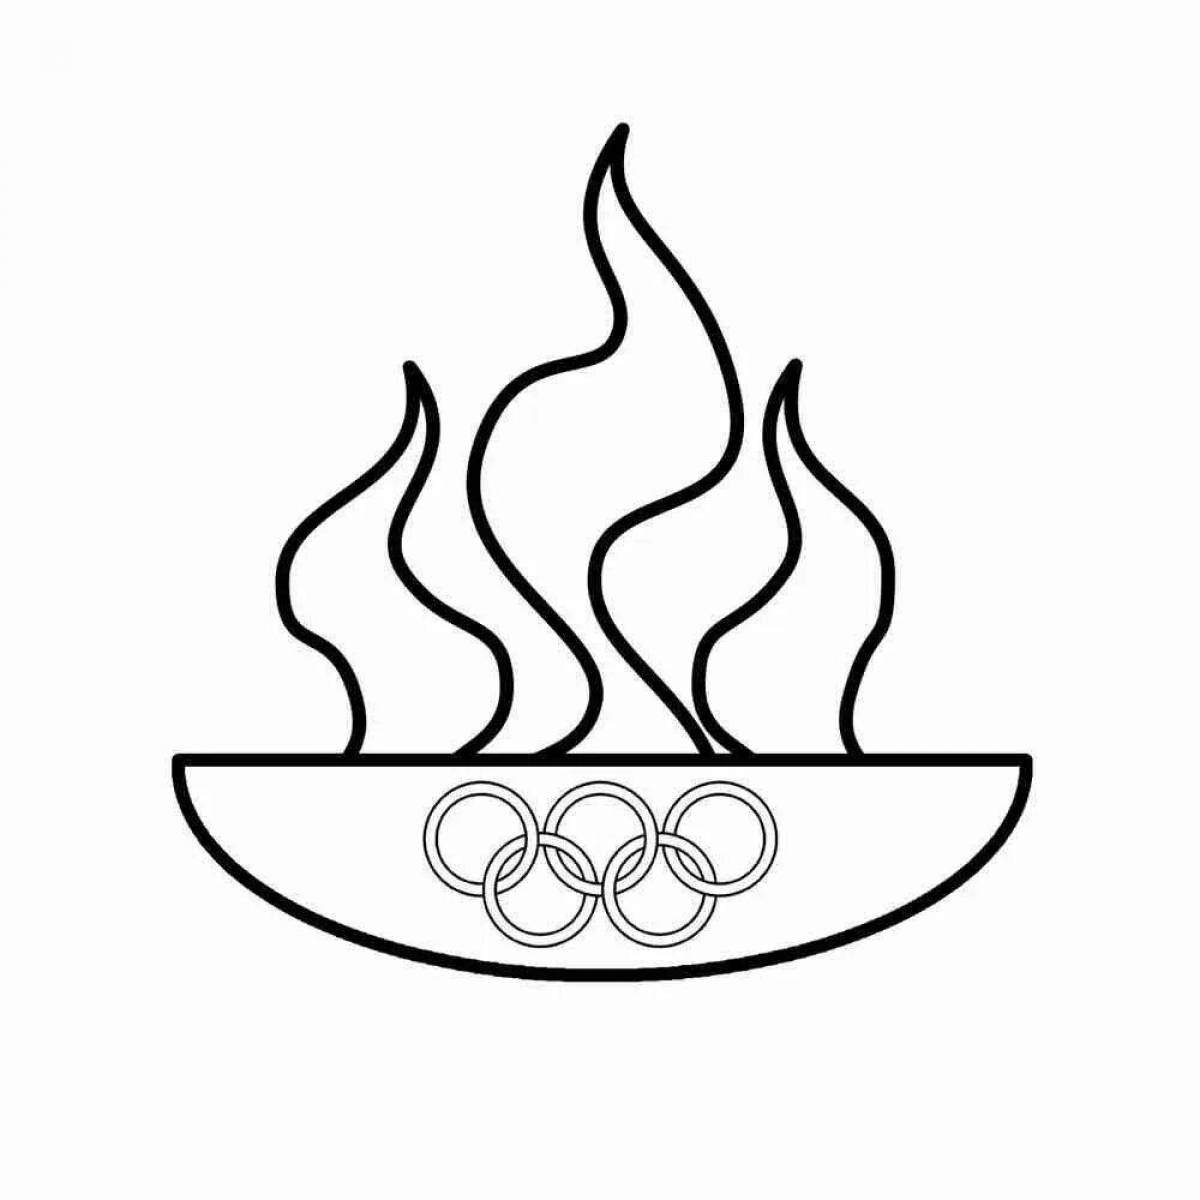 Olympic Flame #1